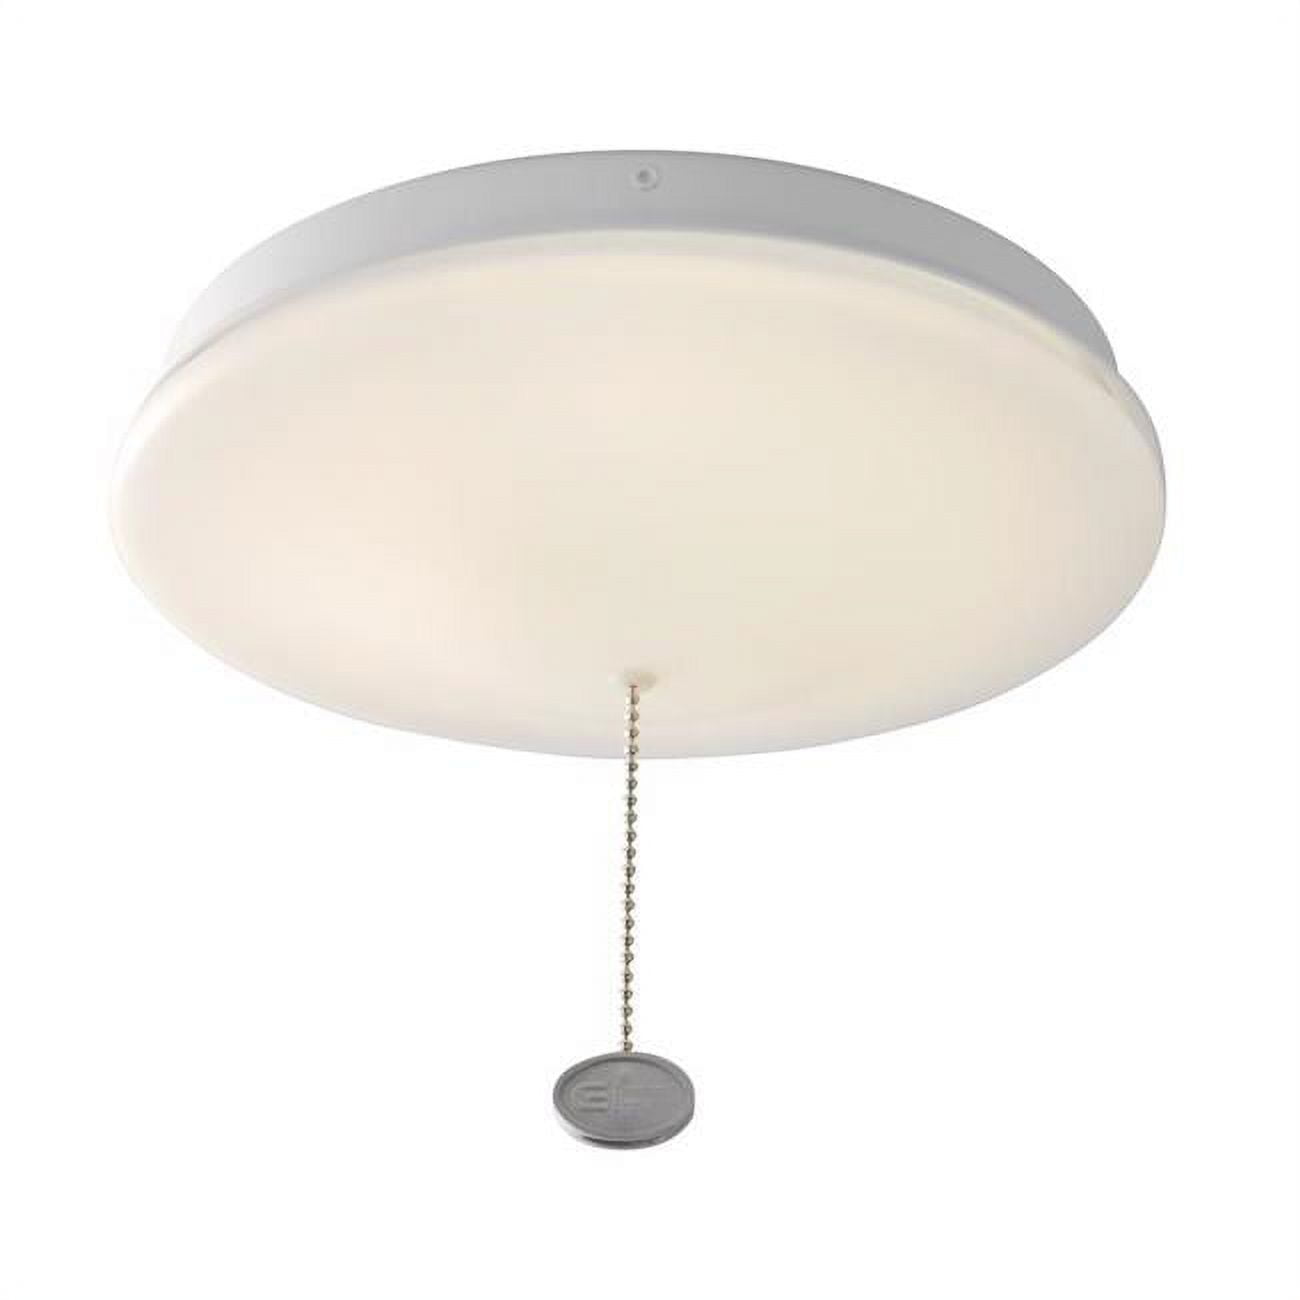 Picture of ETI 3011958 3.68 x 10 x 10 in. Ceiling Light - White